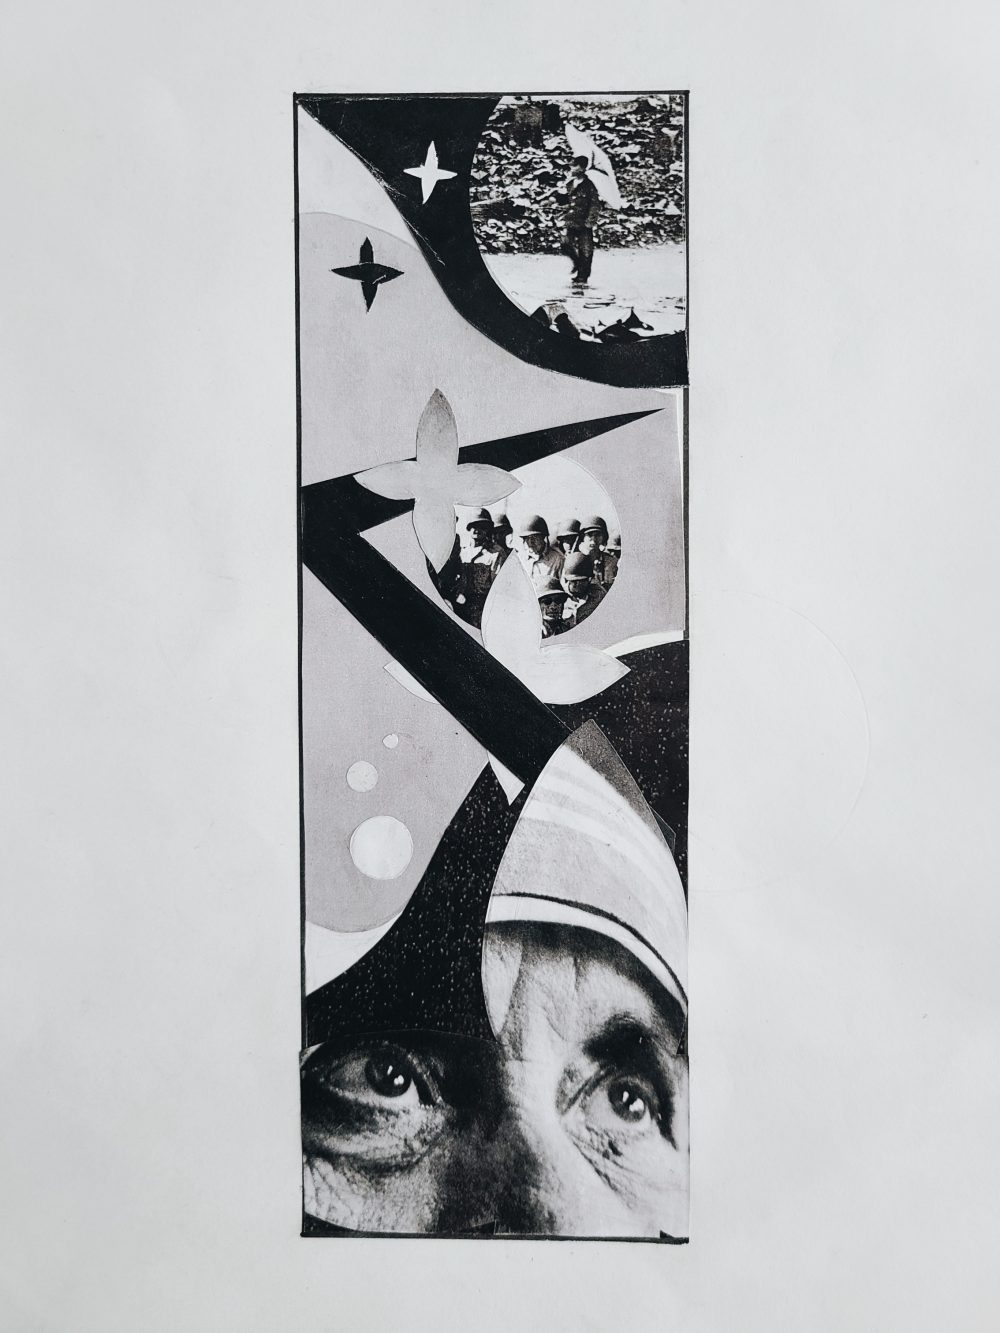 A collage with geometric and freeform figures using magazine paper in black, white, and grey, with three found images. The found images show the aftermath of Hiroshima, American soldiers, and Mother Teresa.